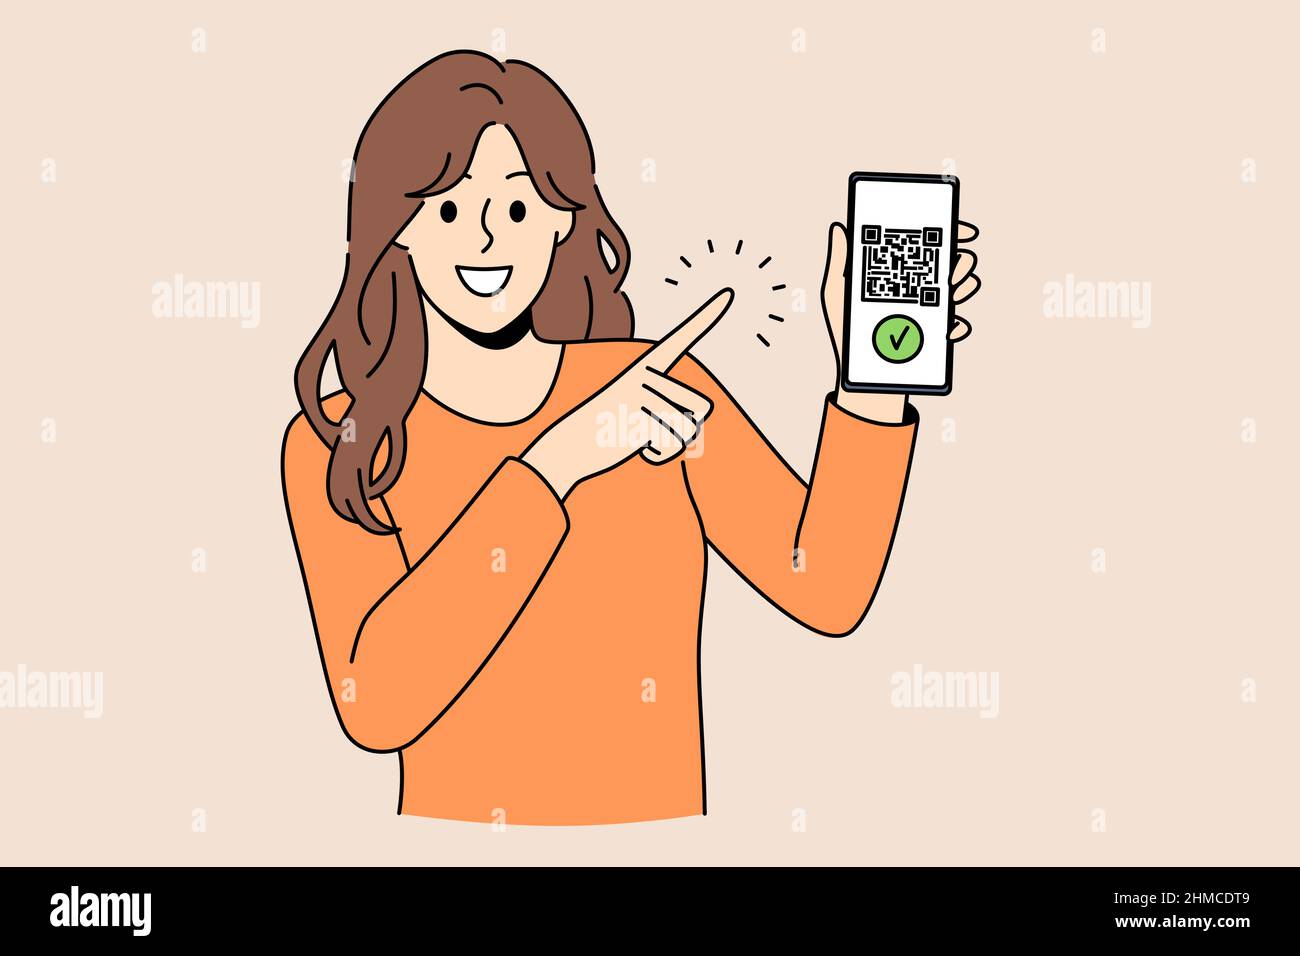 Qr code and Online payment concept. Young woman standing pointing at smartphone screen with qr code and payment confirmation on it vector illustration  Stock Vector